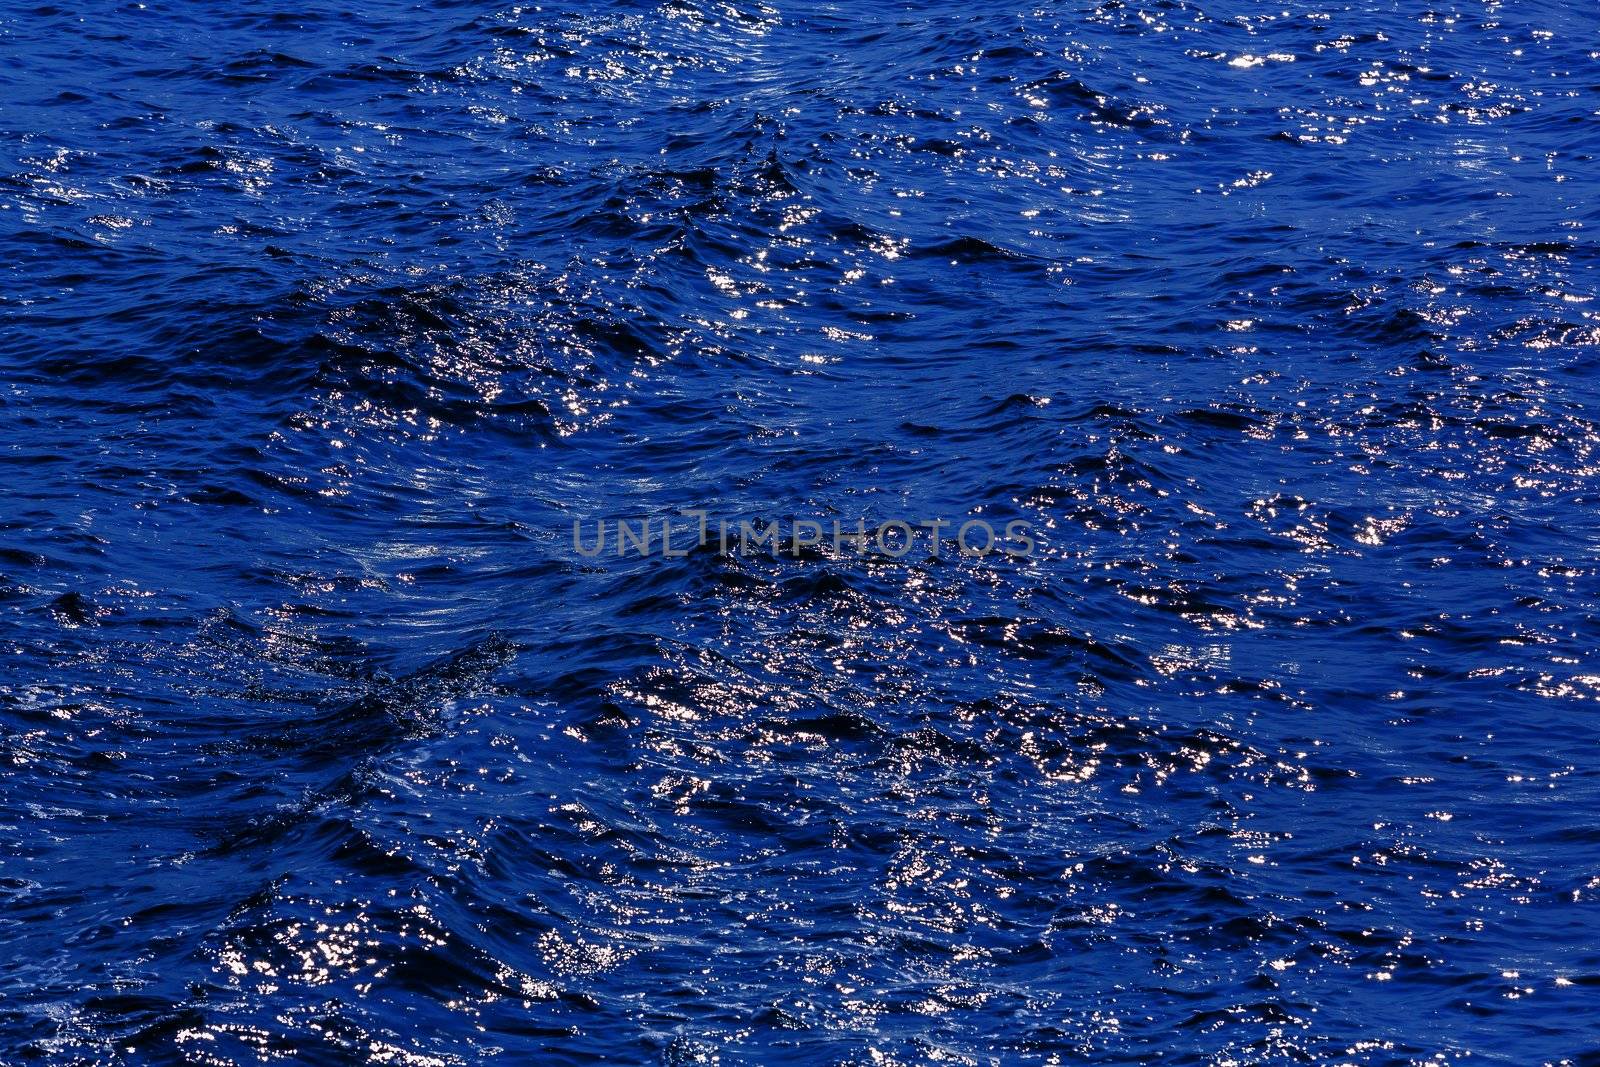 Abstract blue sea by smuay